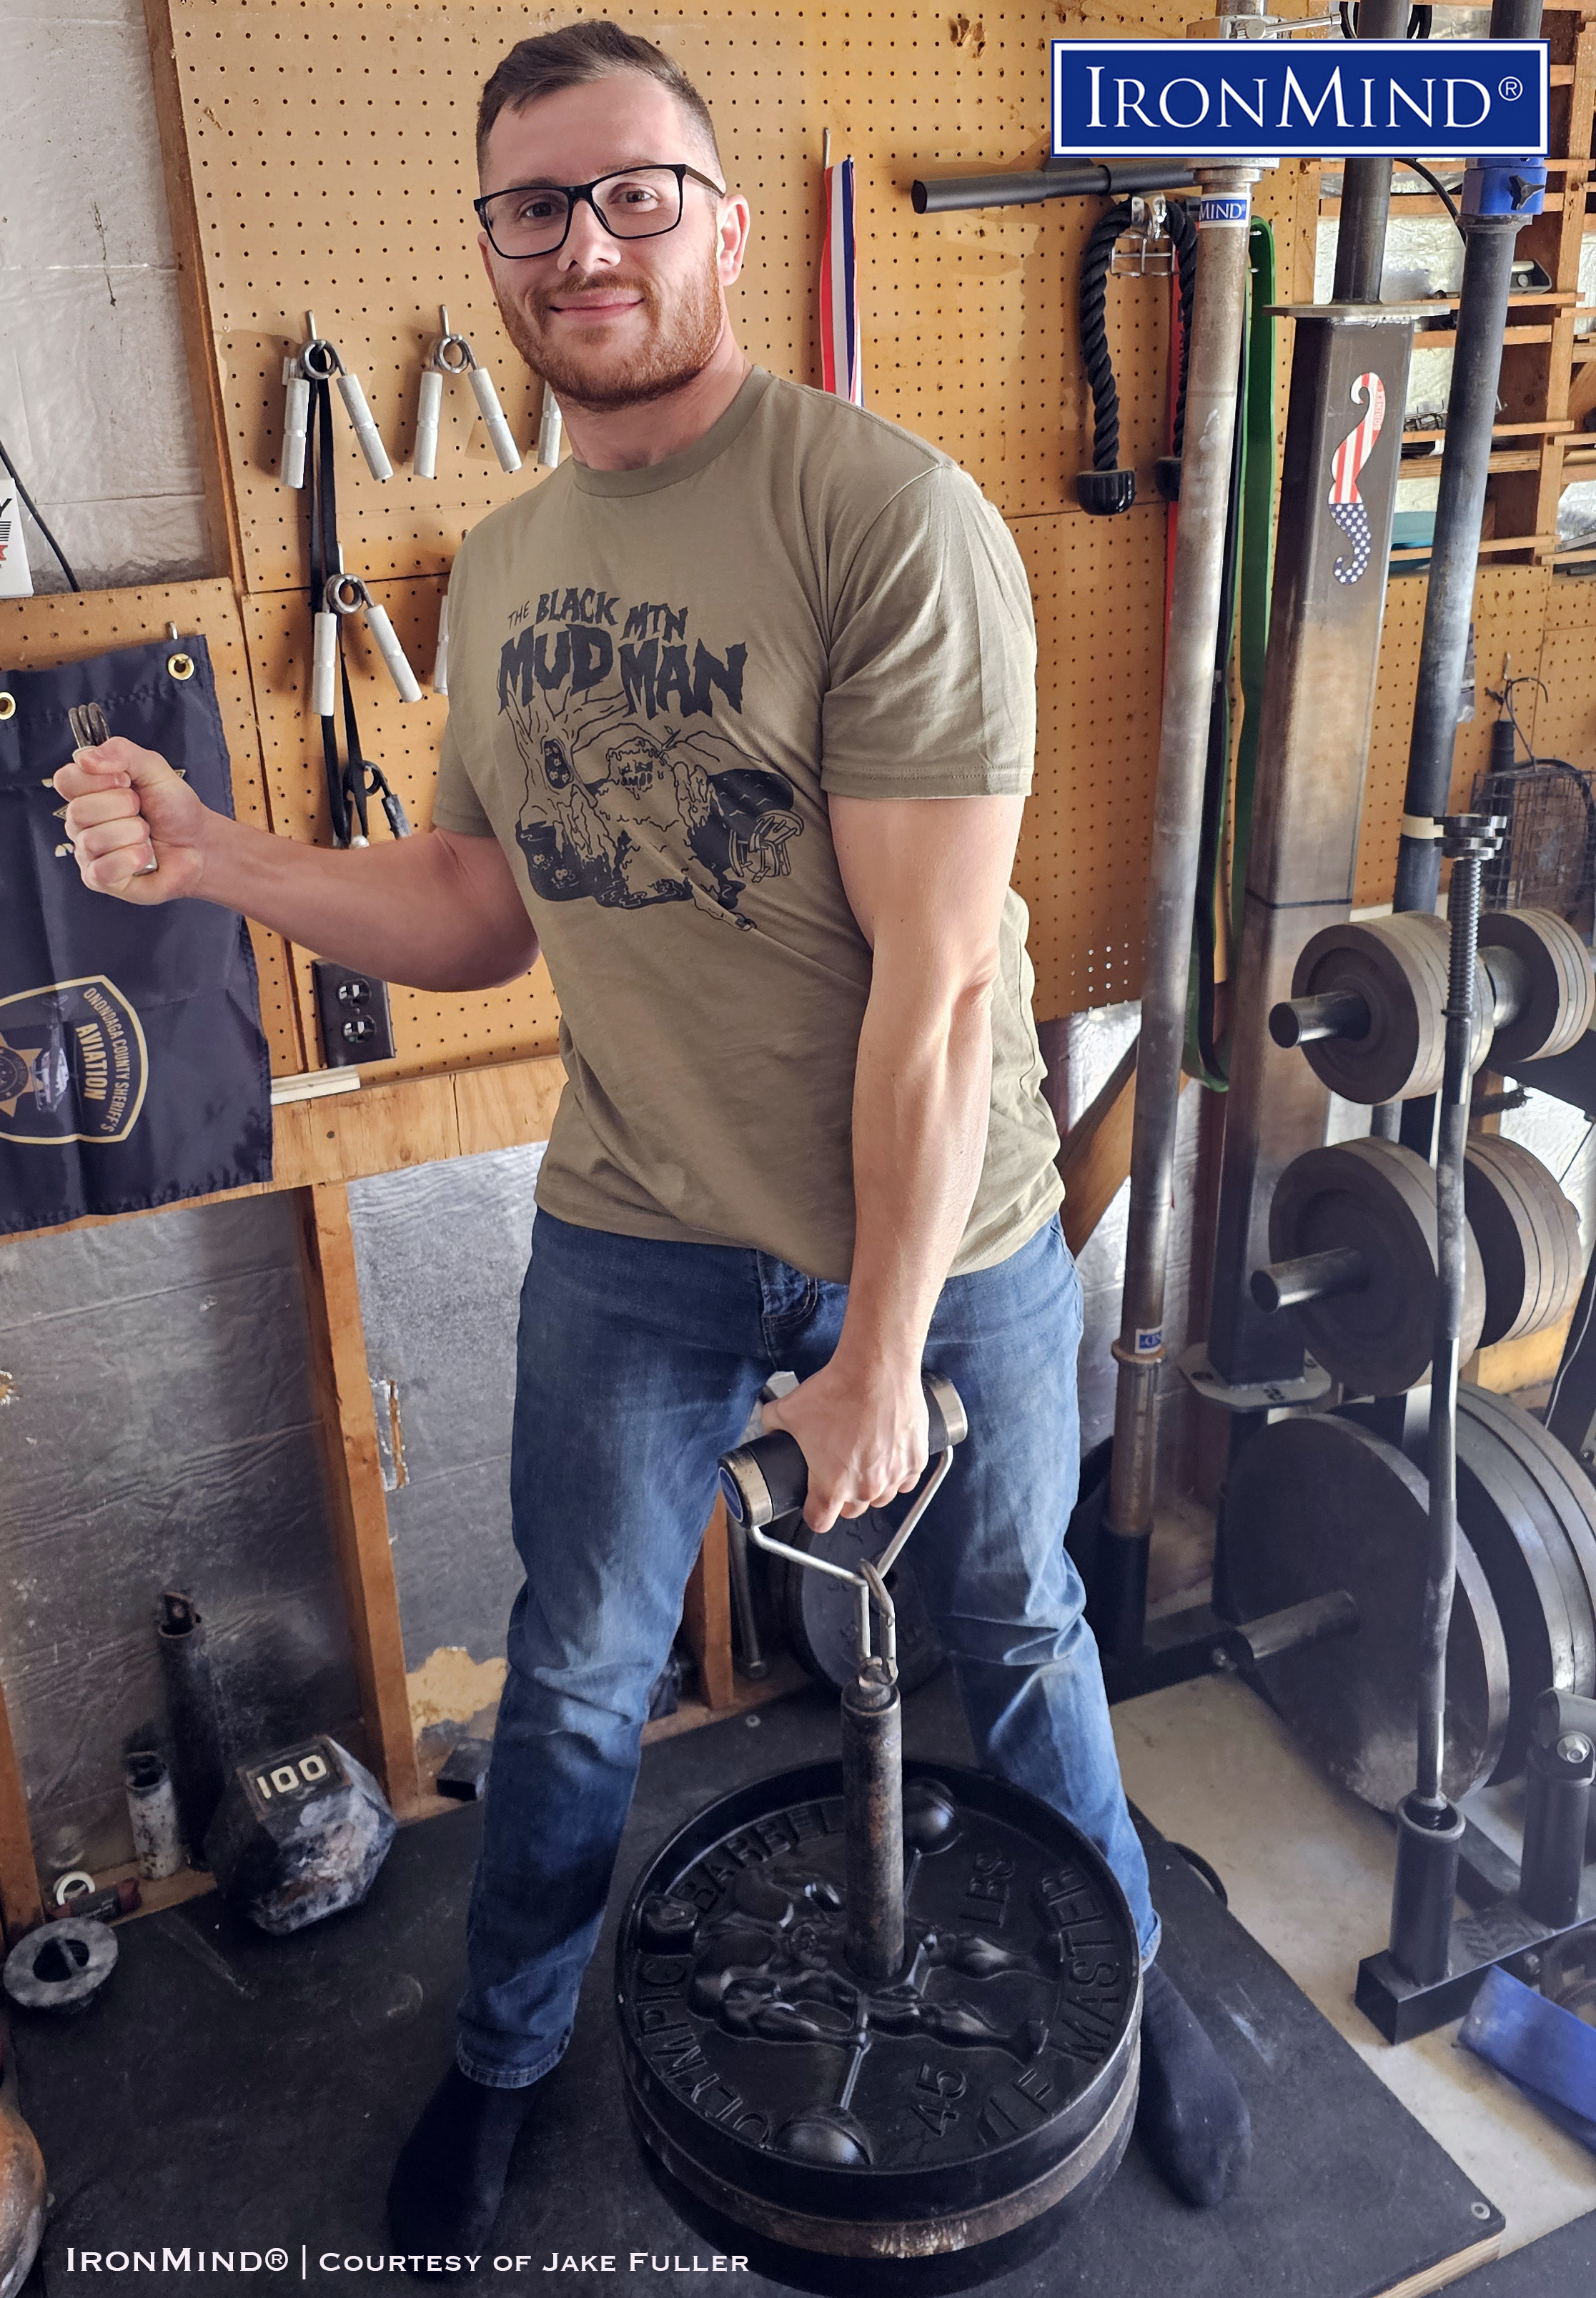 Aircraft machinist Jake Fuller just made a big splash in the grip strength world with back-to-back certifications on the Captains of Crush No. 3 gripper and the Crushed-To-Dust Challenge. IronMind® | Photo courtesy of Jake Fuller